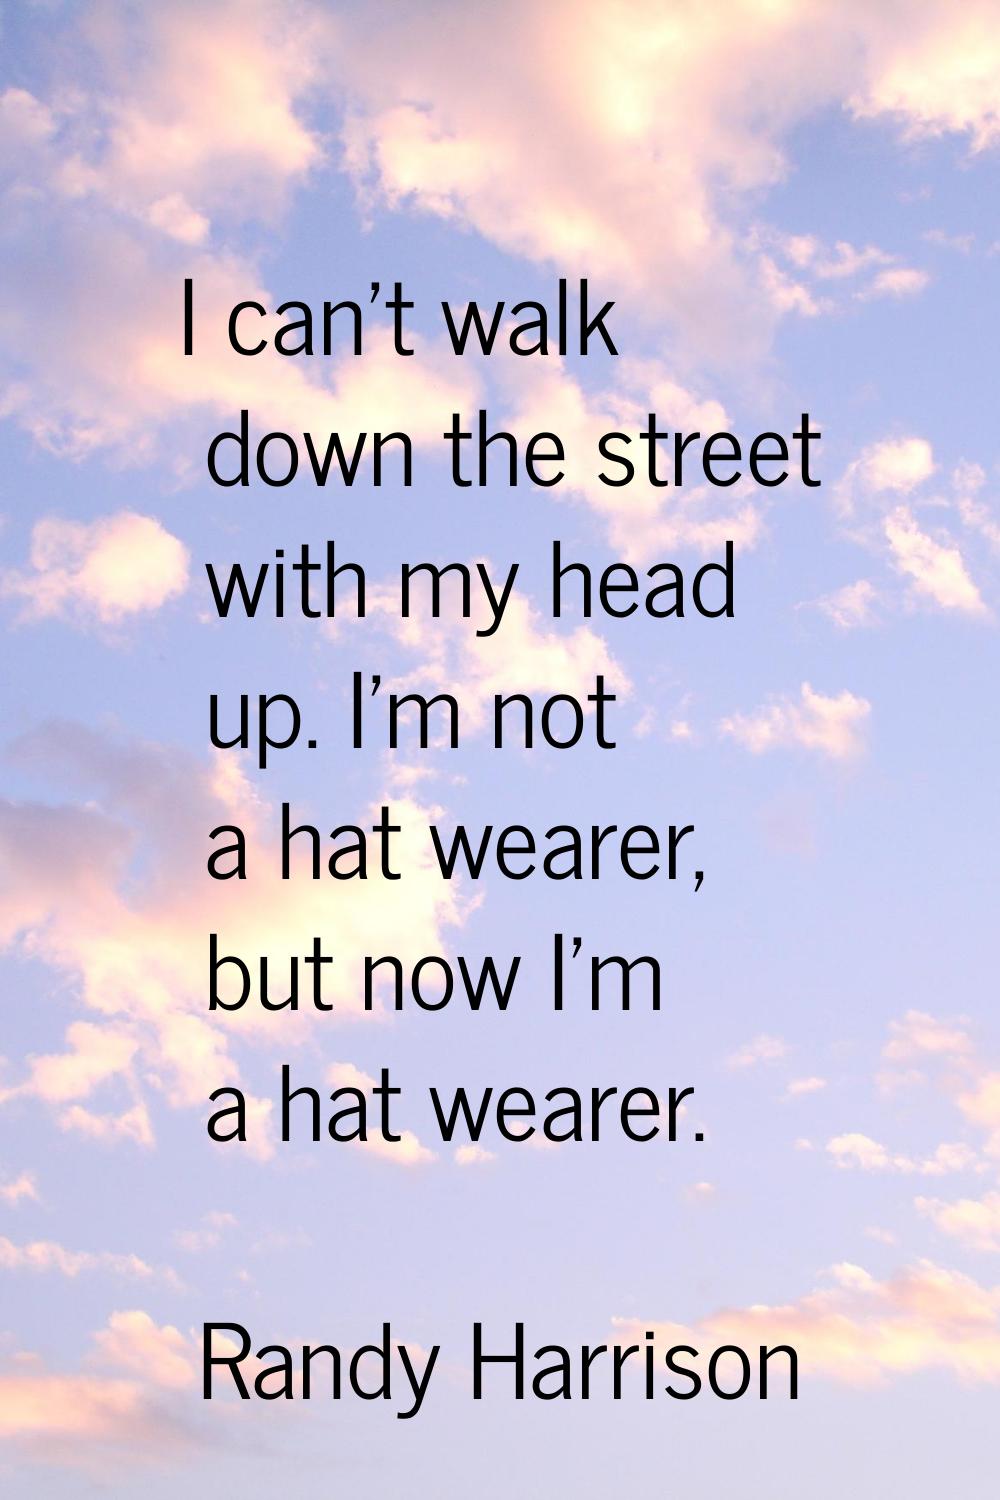 I can't walk down the street with my head up. I'm not a hat wearer, but now I'm a hat wearer.